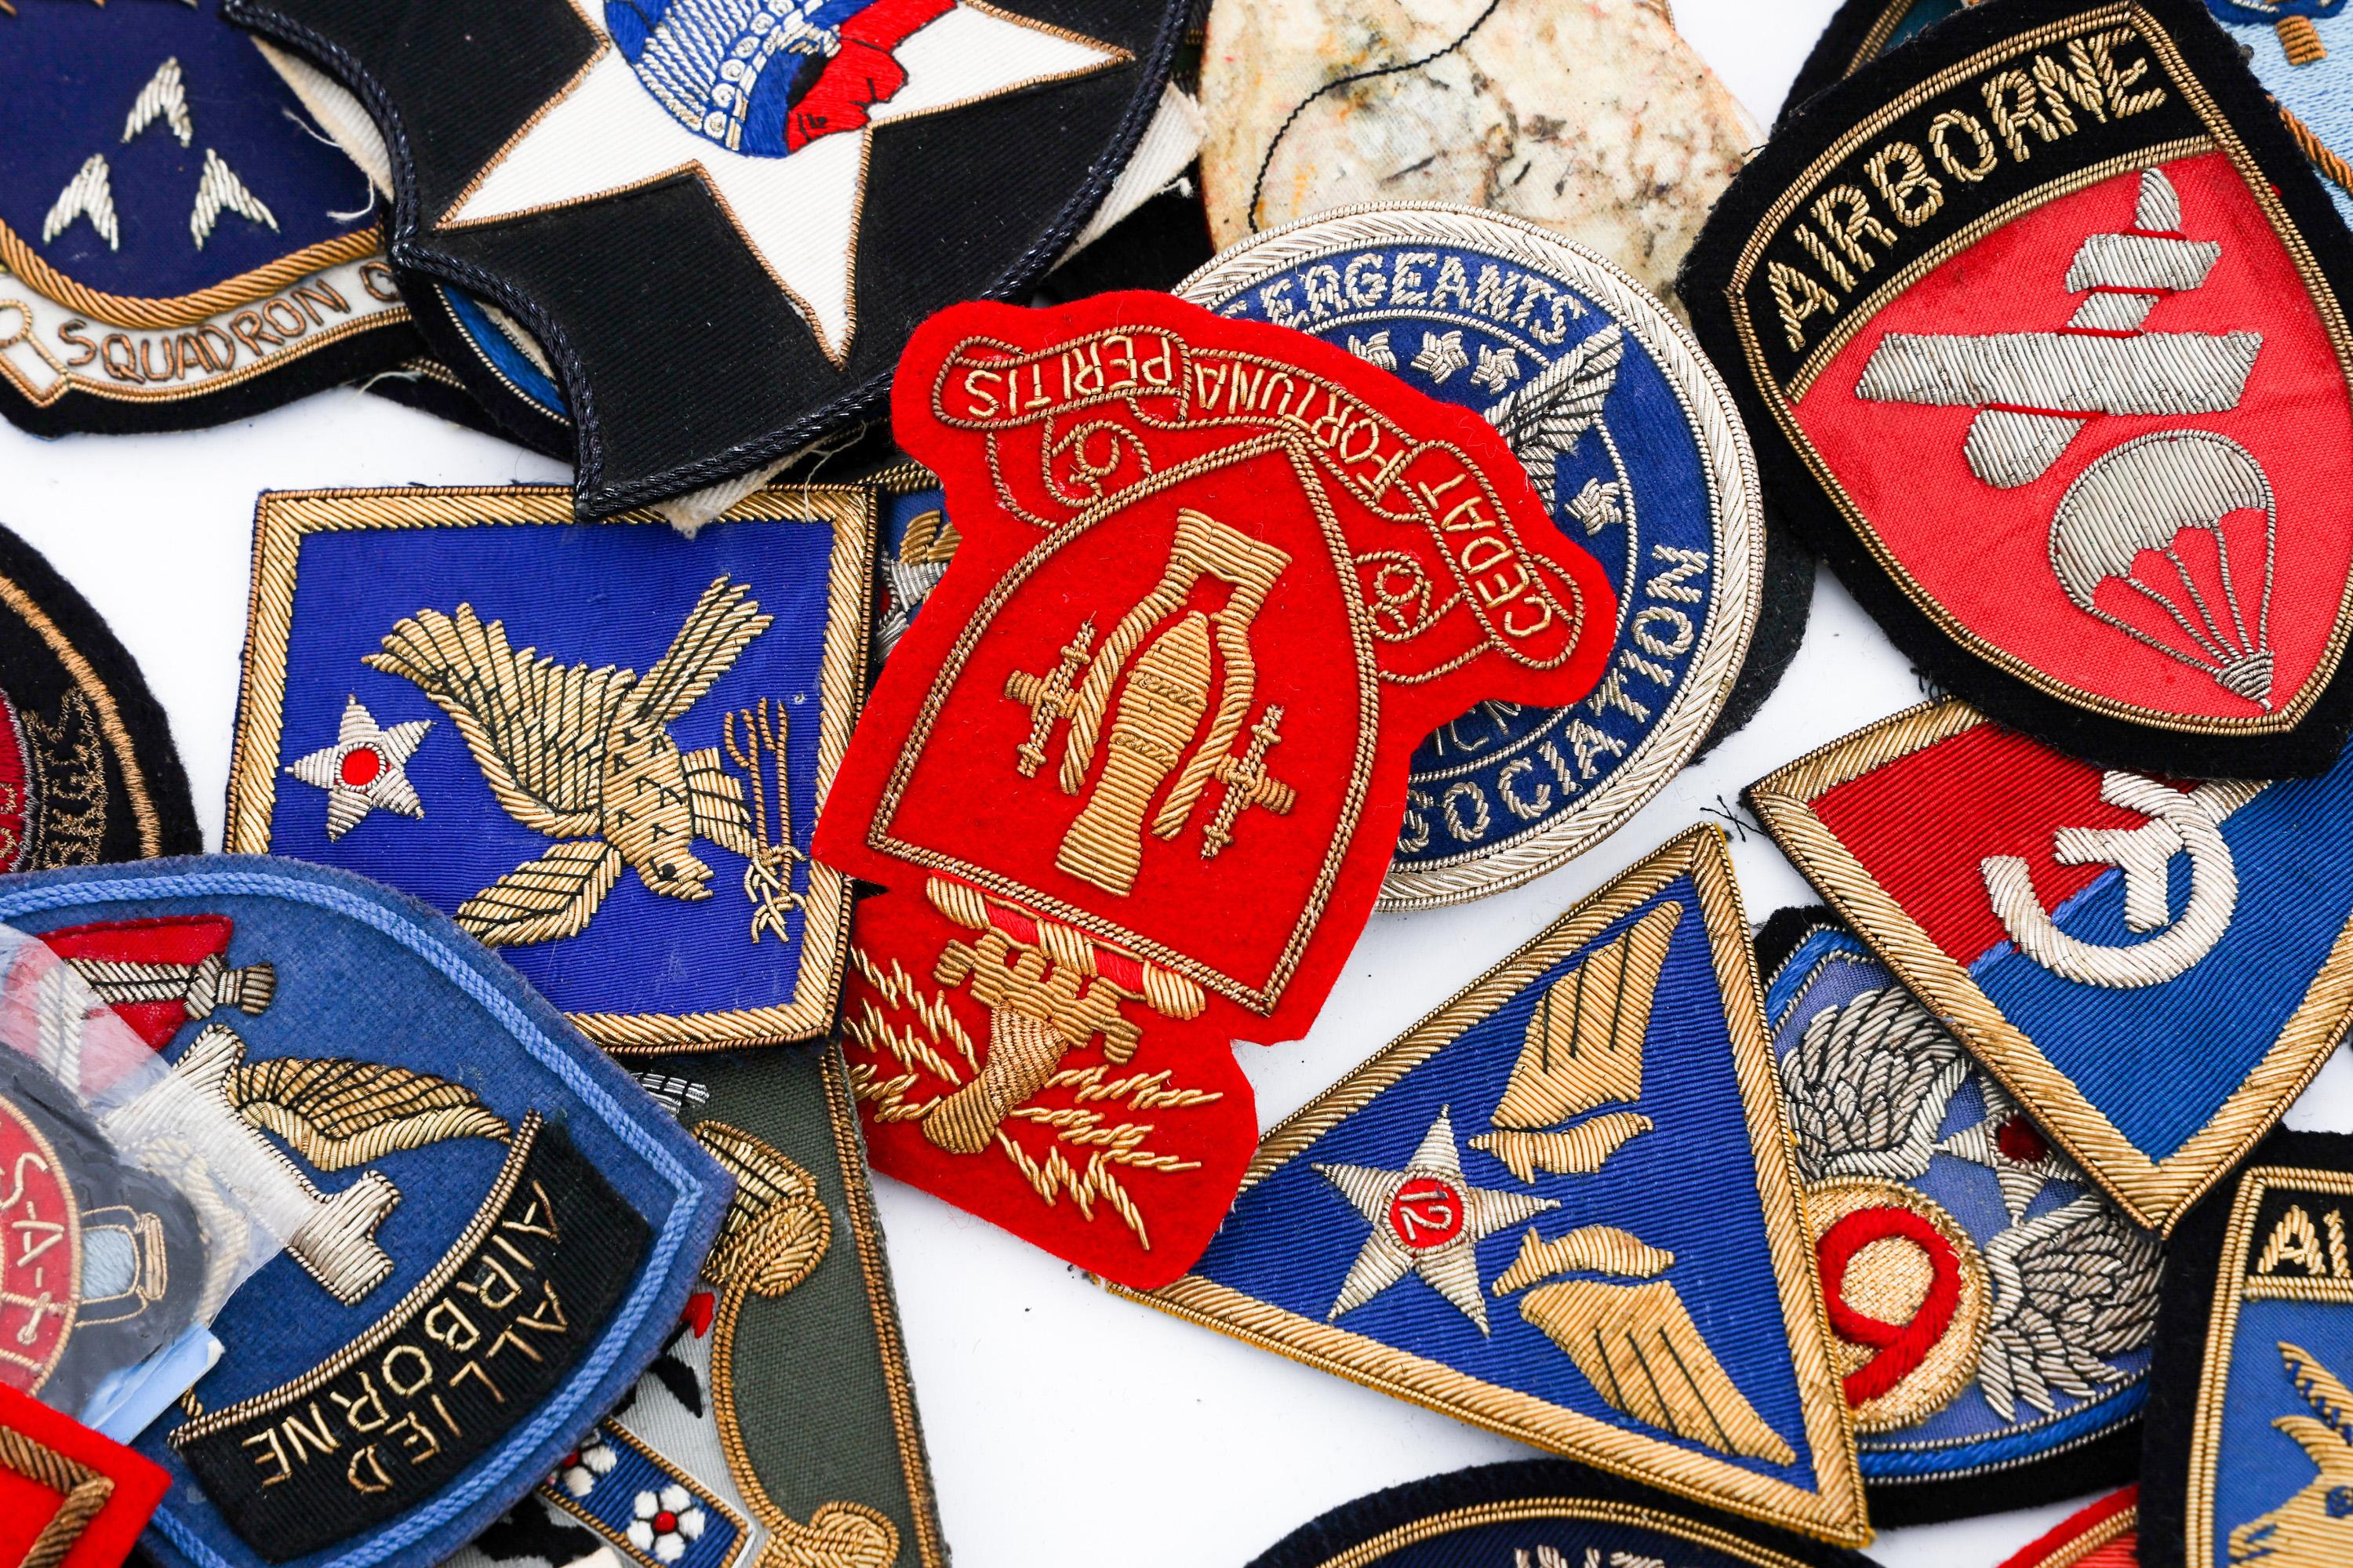 NOVELTY & MODERN US ARMED FORCES BULLION PATCHES